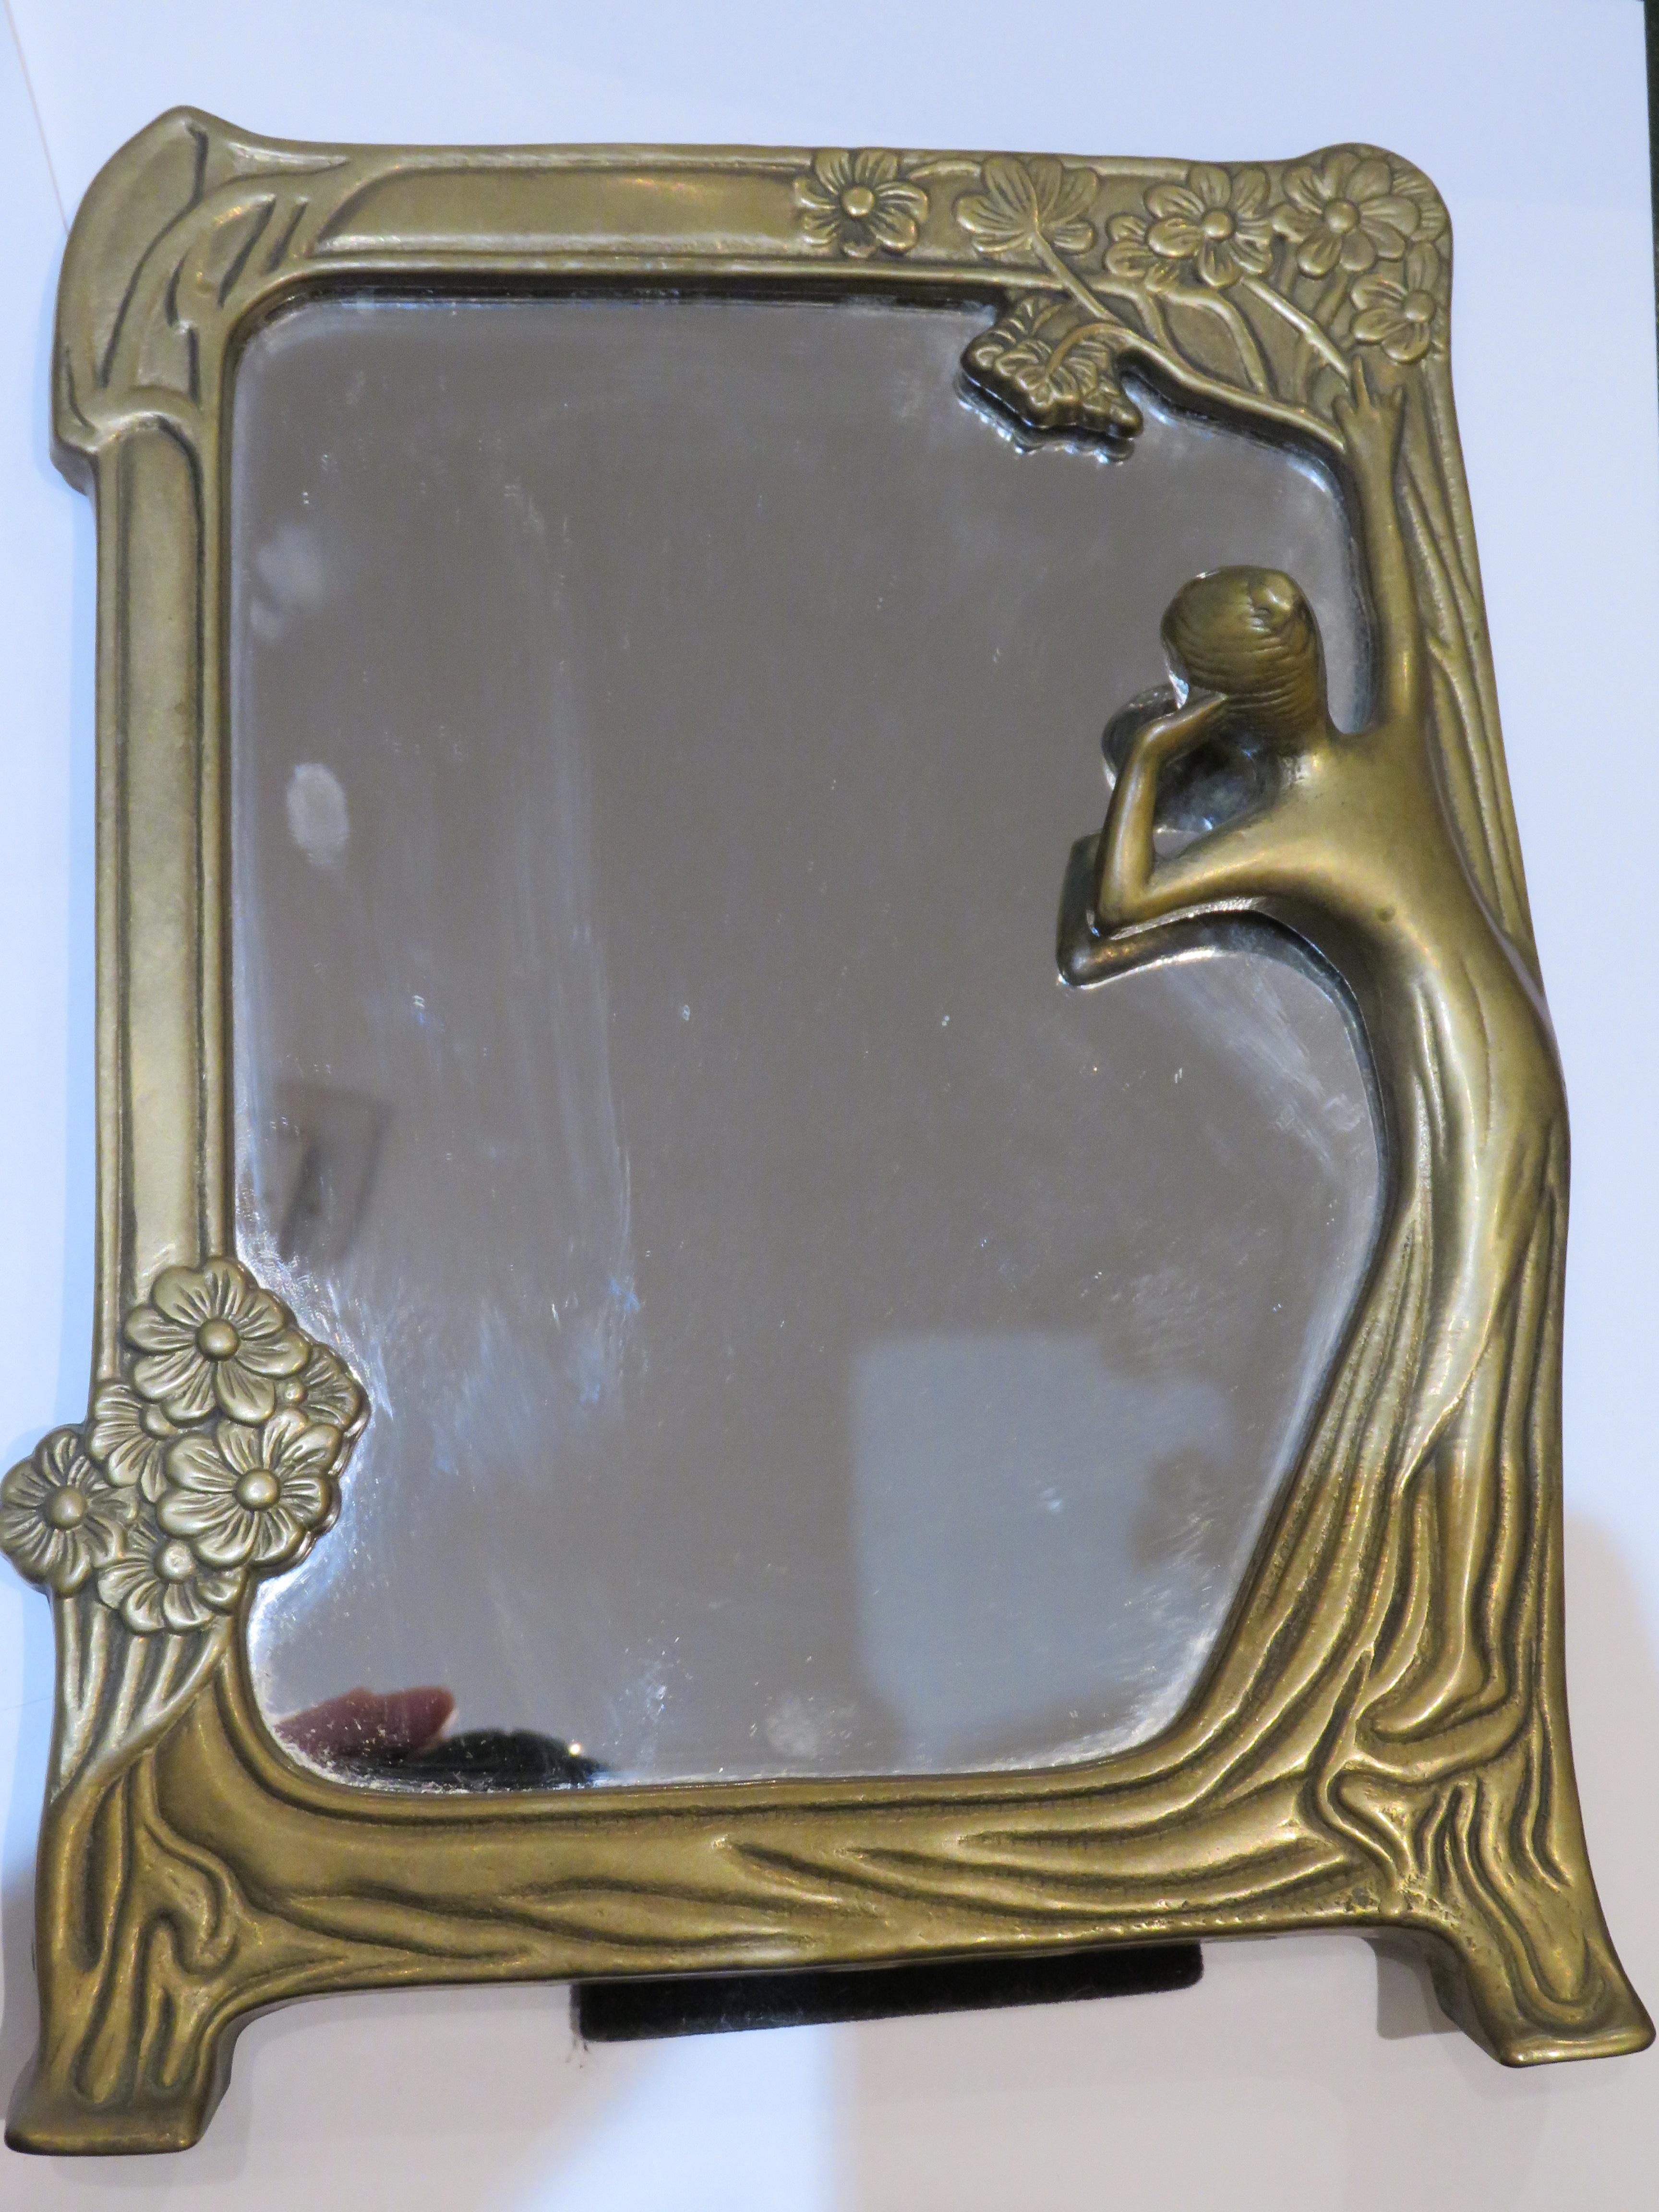 An Outstanding Art Deco Maiden Vanity Standing Flip Mirror. Finely done with Impressive Bronze Detail of a Maiden Fixing her Hair. Taken out of an Upper East Side New York City Estate. 

